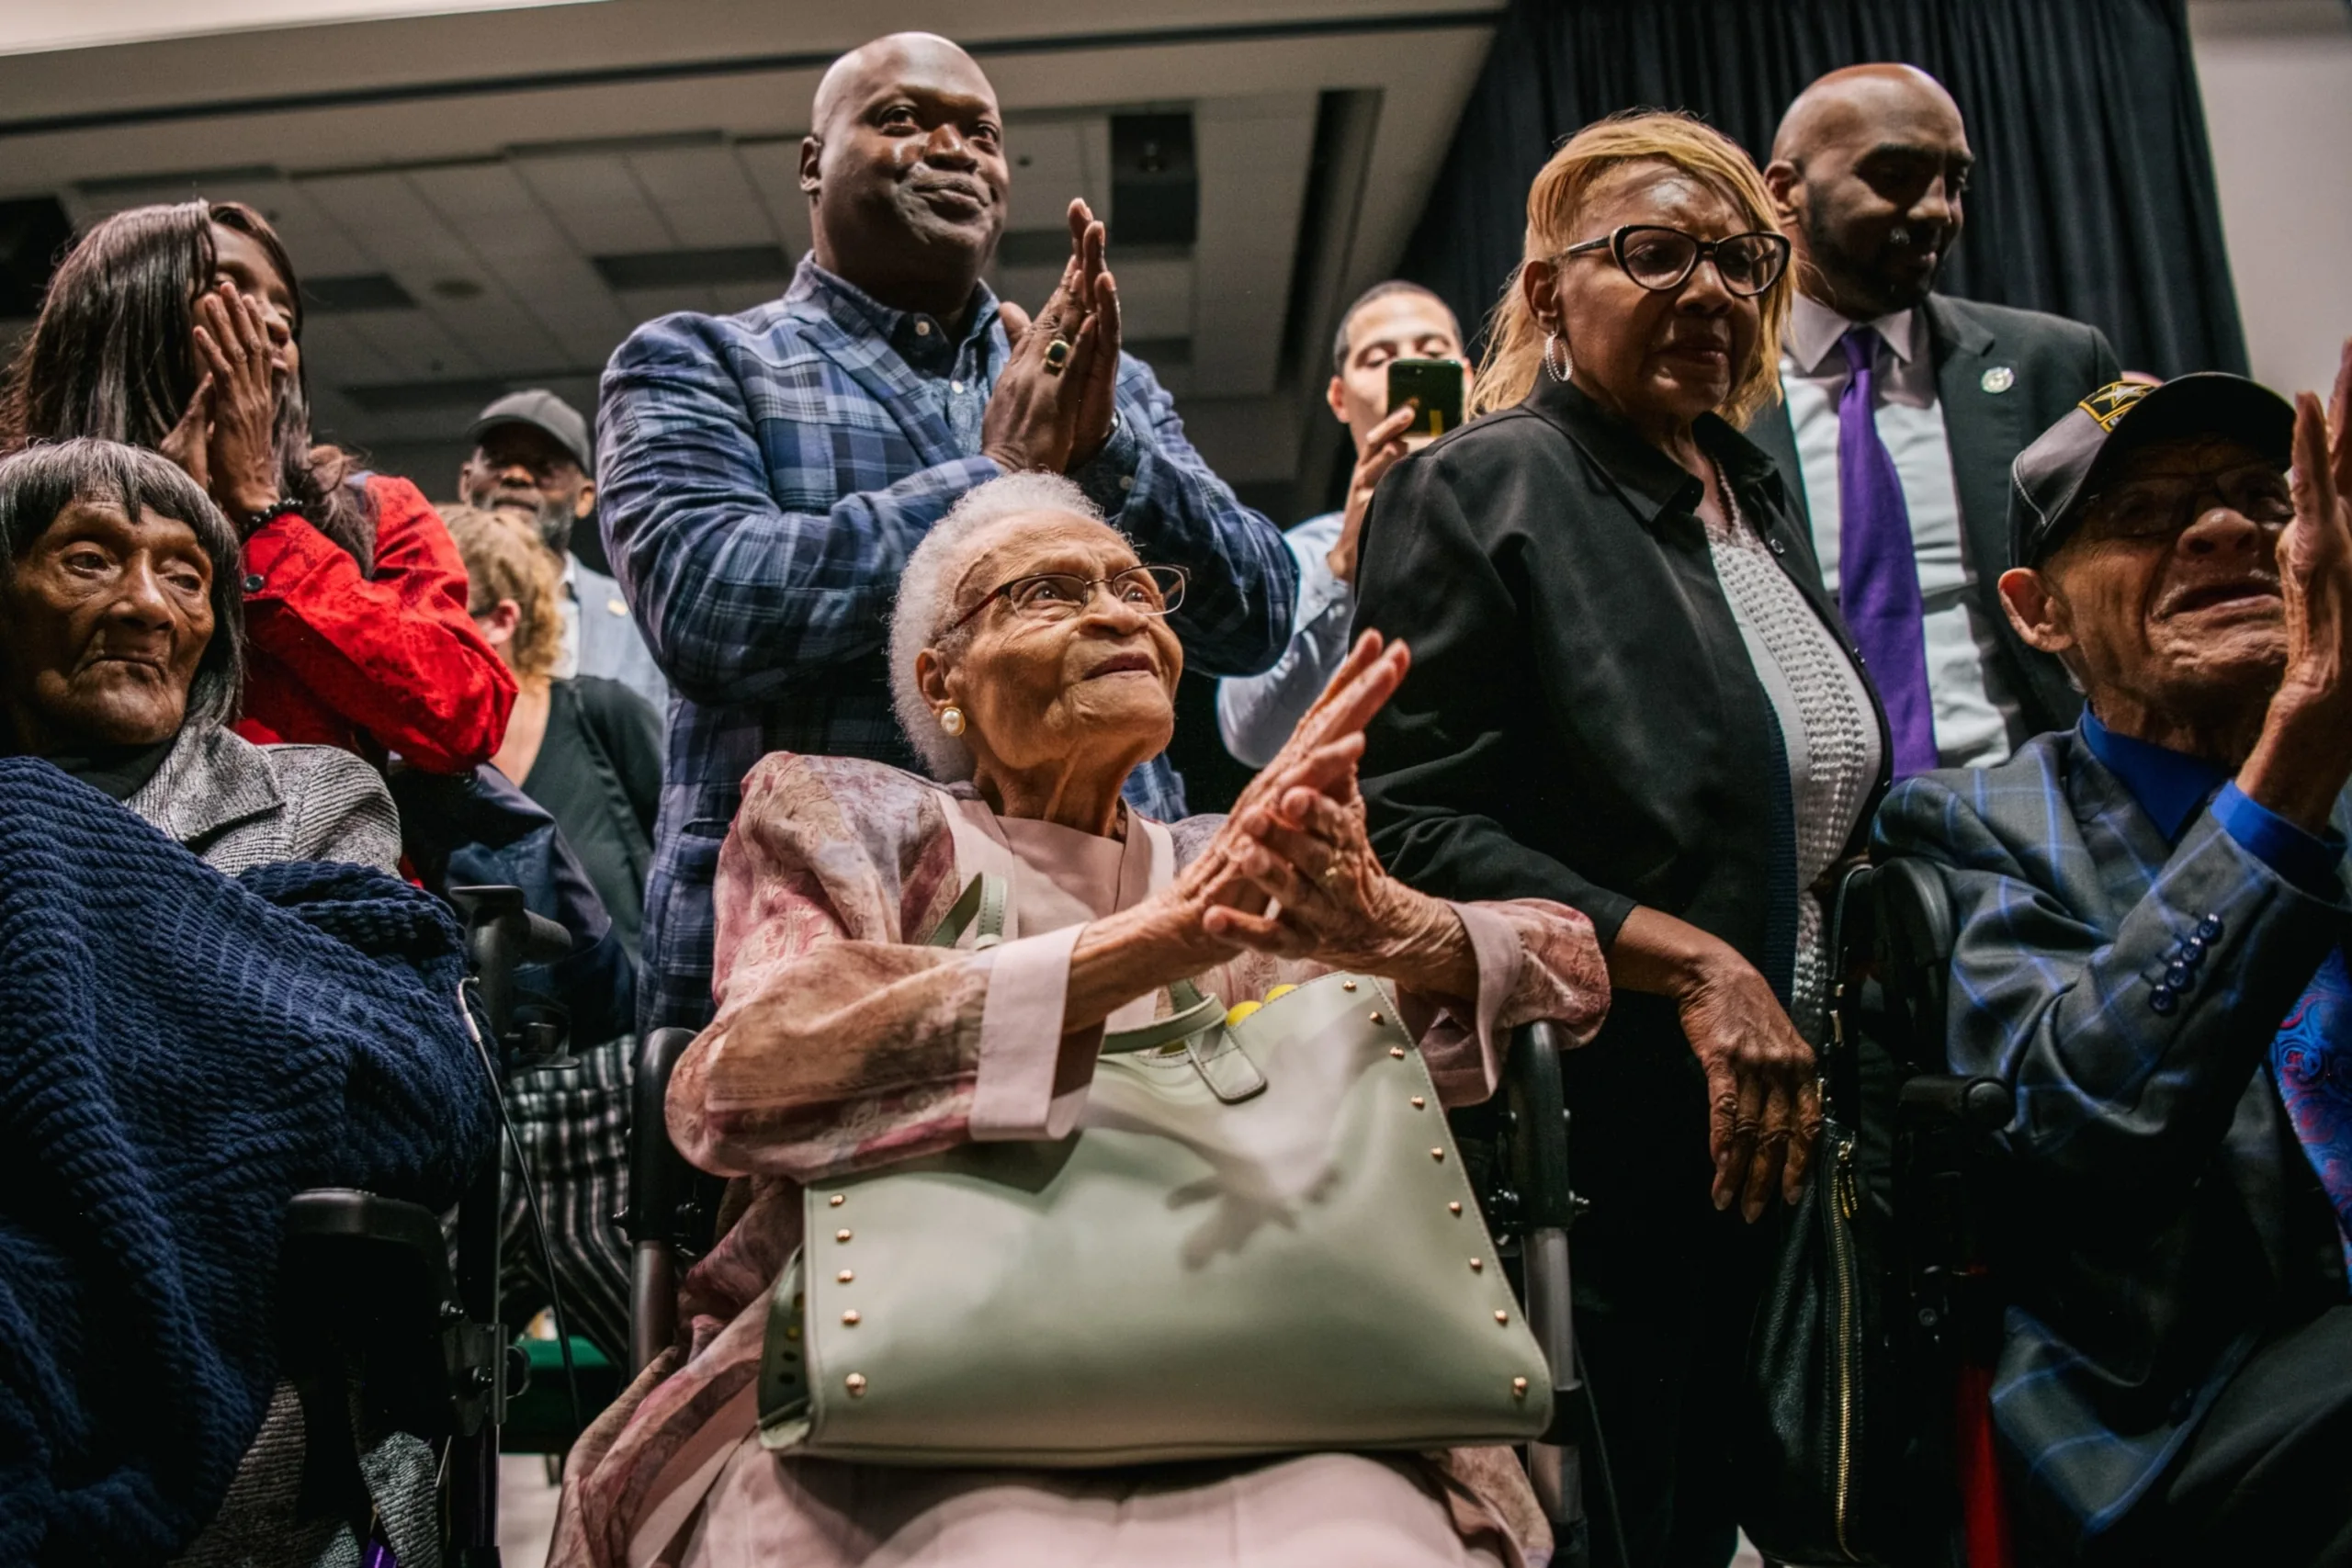 PHOTO: Survivors Lessie Benningfield Randle, Viola Fletcher, and Hughes Van Ellis sing together at the conclusion of a rally during commemorations of the 100th anniversary of the Tulsa Race Massacre on June 1, 2021, in Tulsa, Oklahoma.